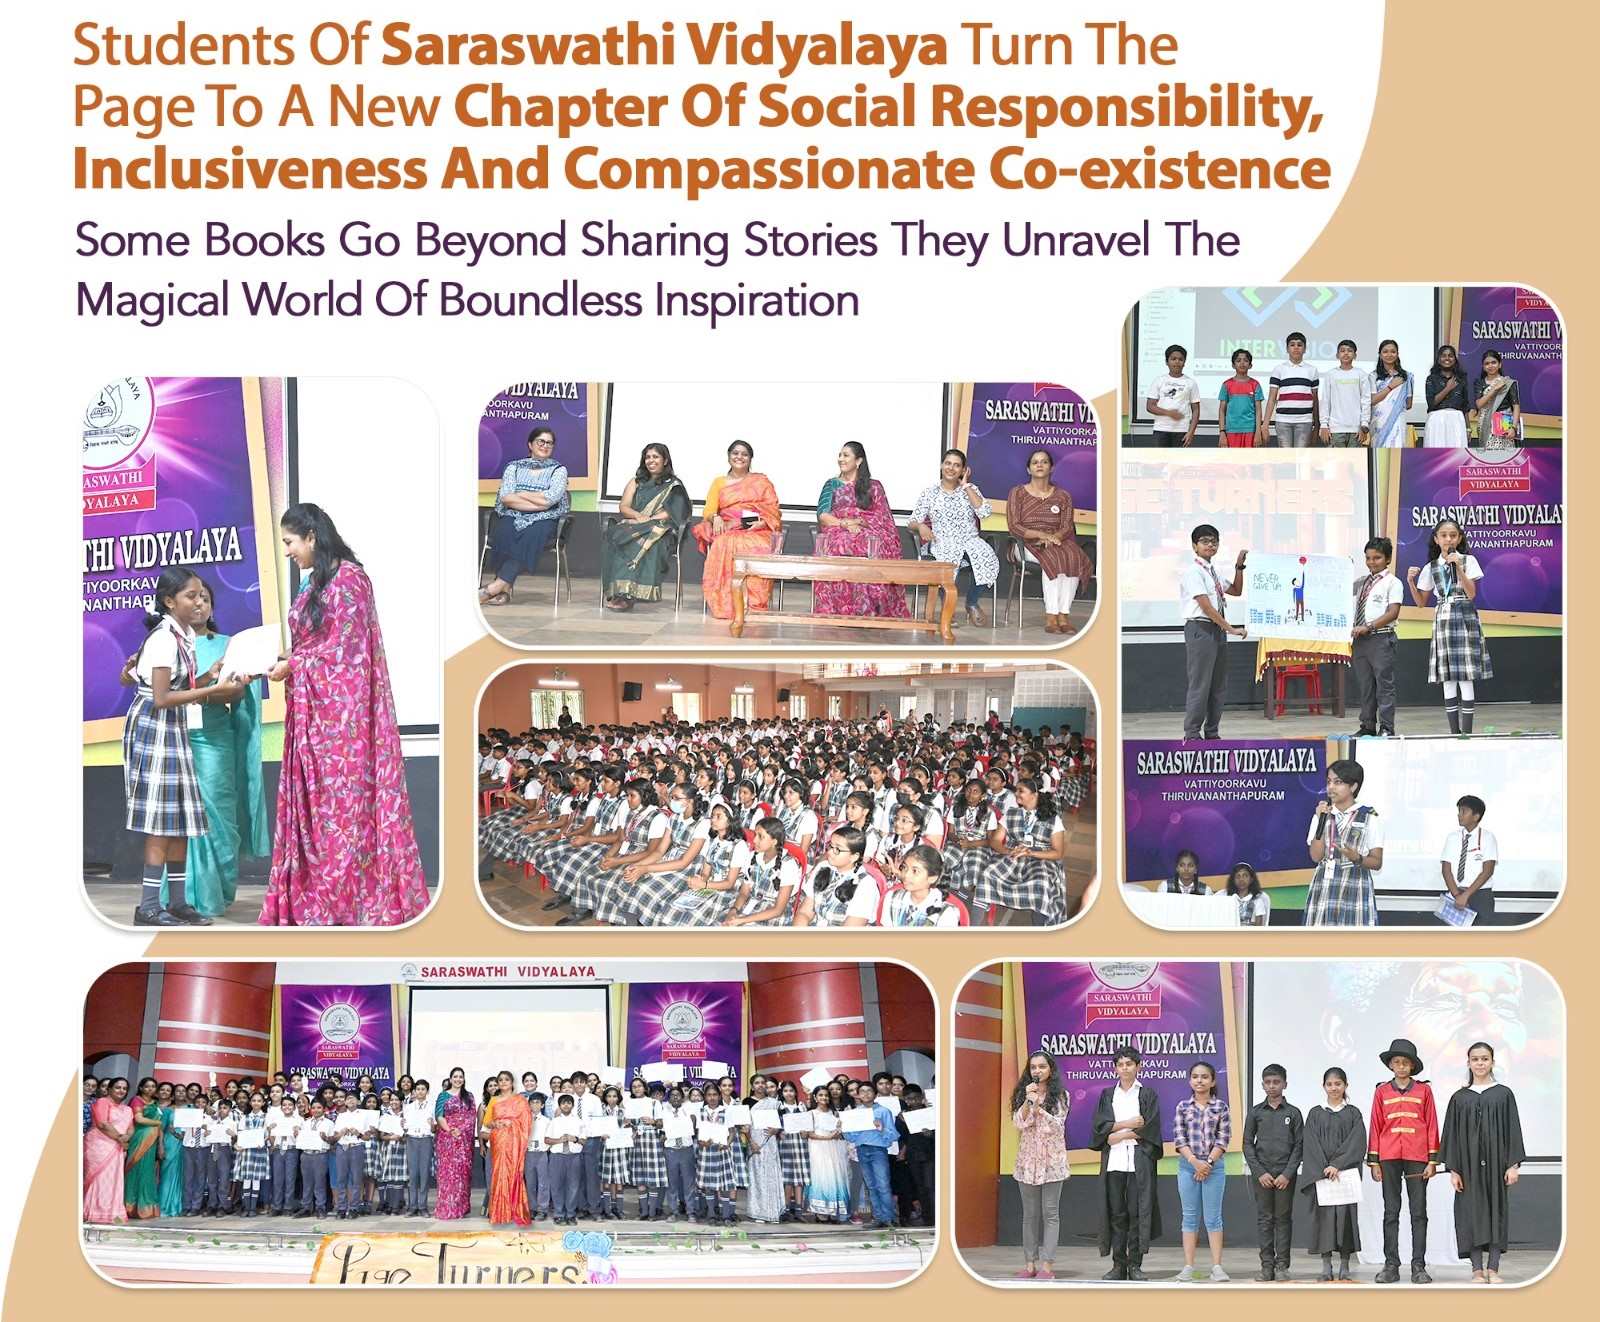 Students Of Saraswathi Vidyalaya Turn The Page To A New Chapter Of Social Responsibility, Inclusiveness And Compassionate Co-existence